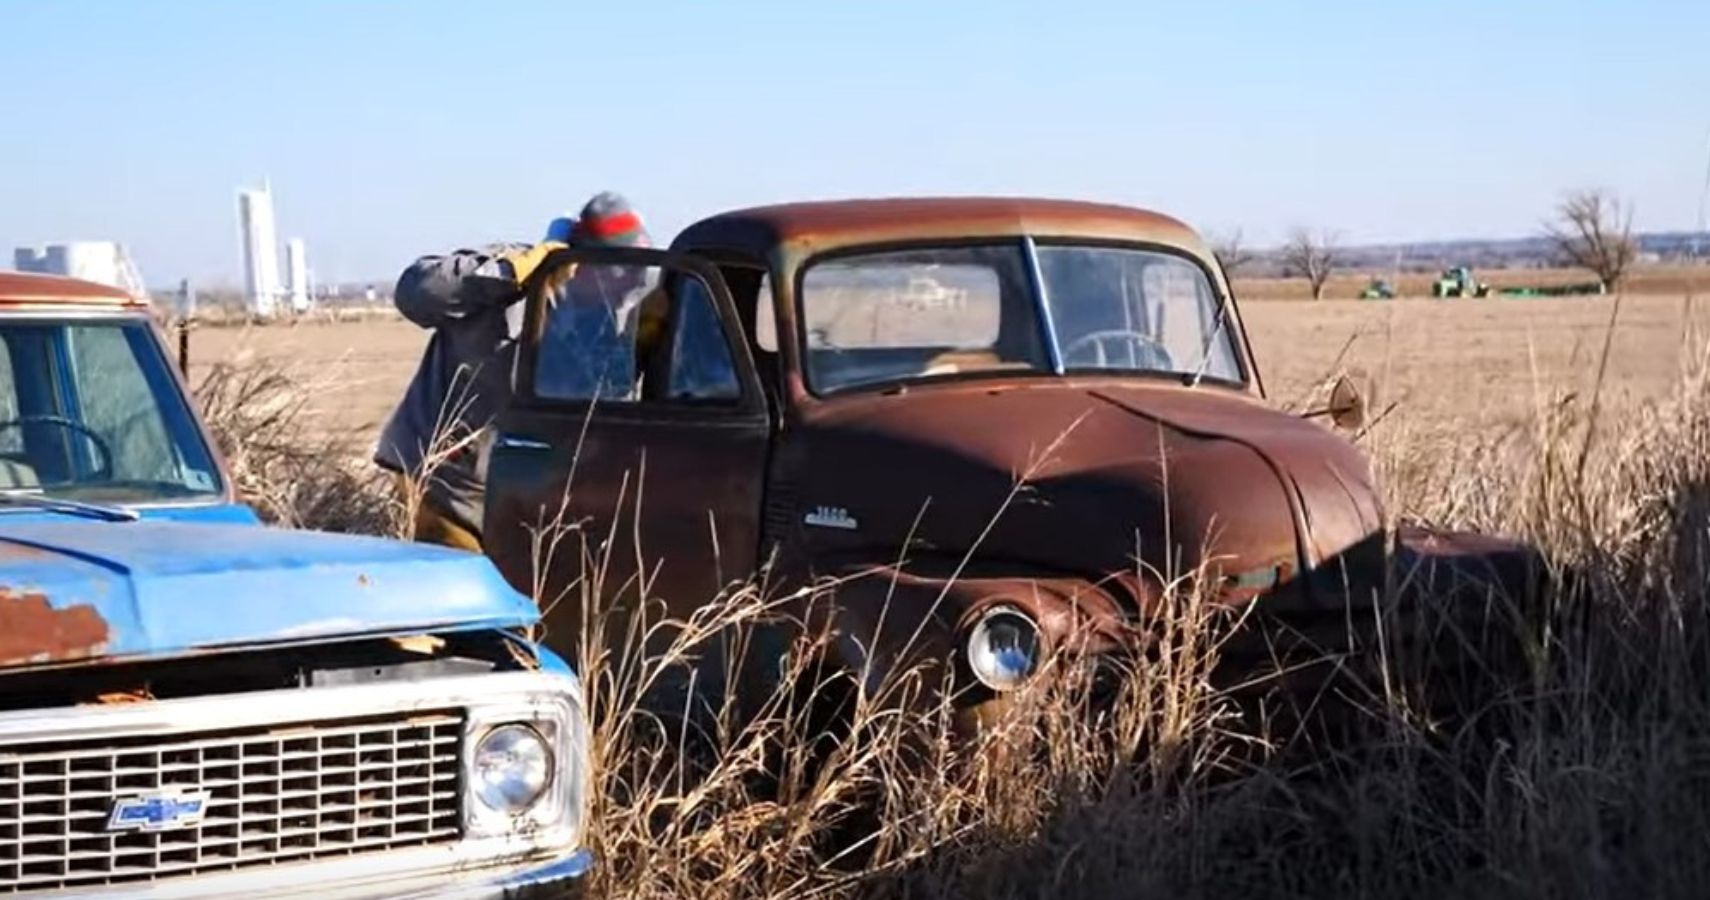 Classic Abandoned Trucks in an Oklahoma field